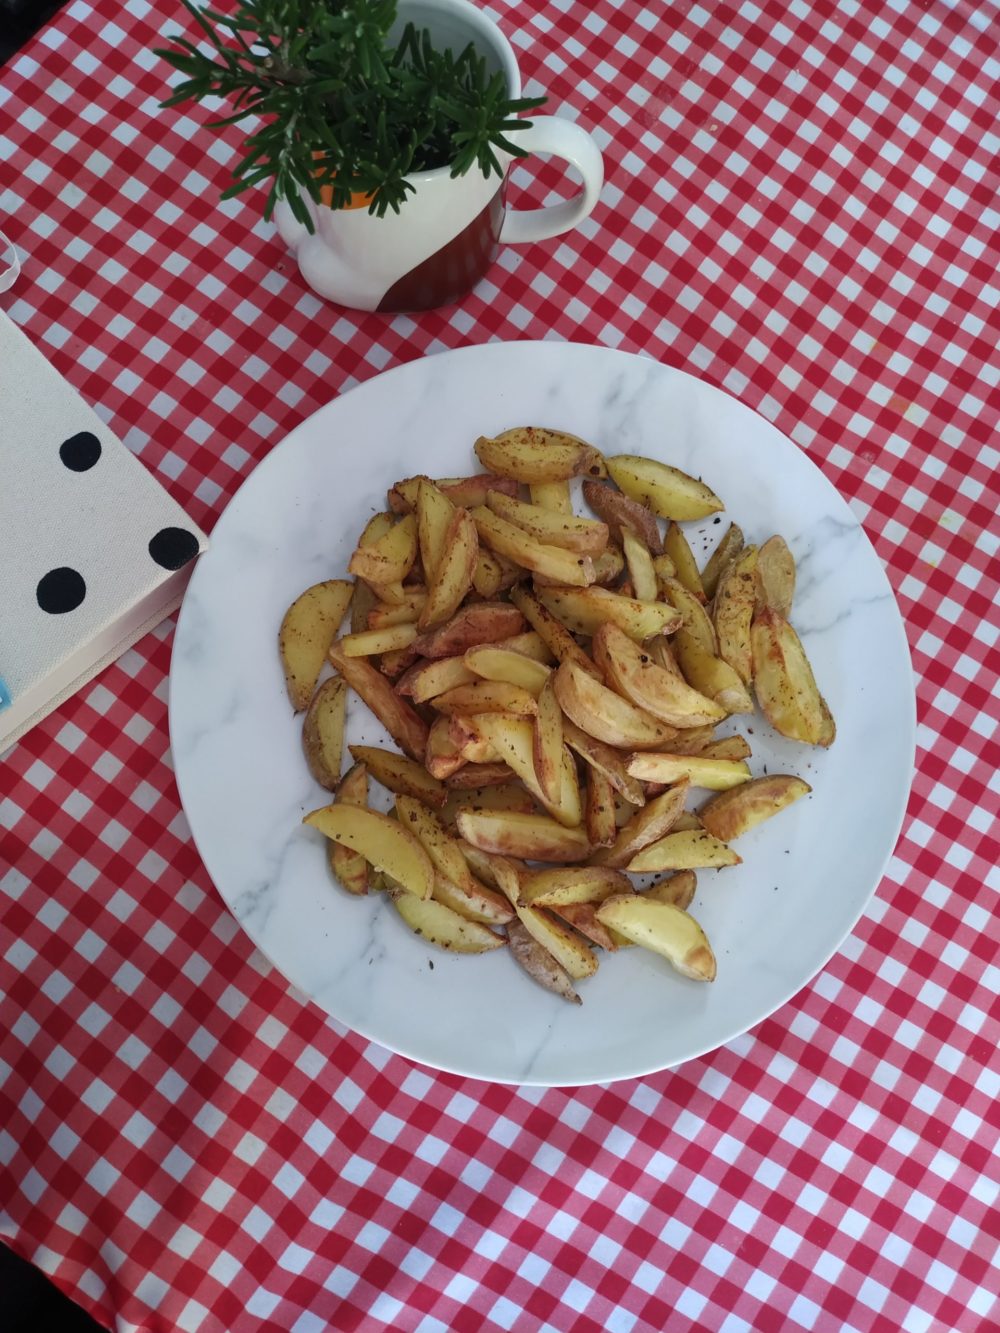 homemade vegan french fries on a picnic table